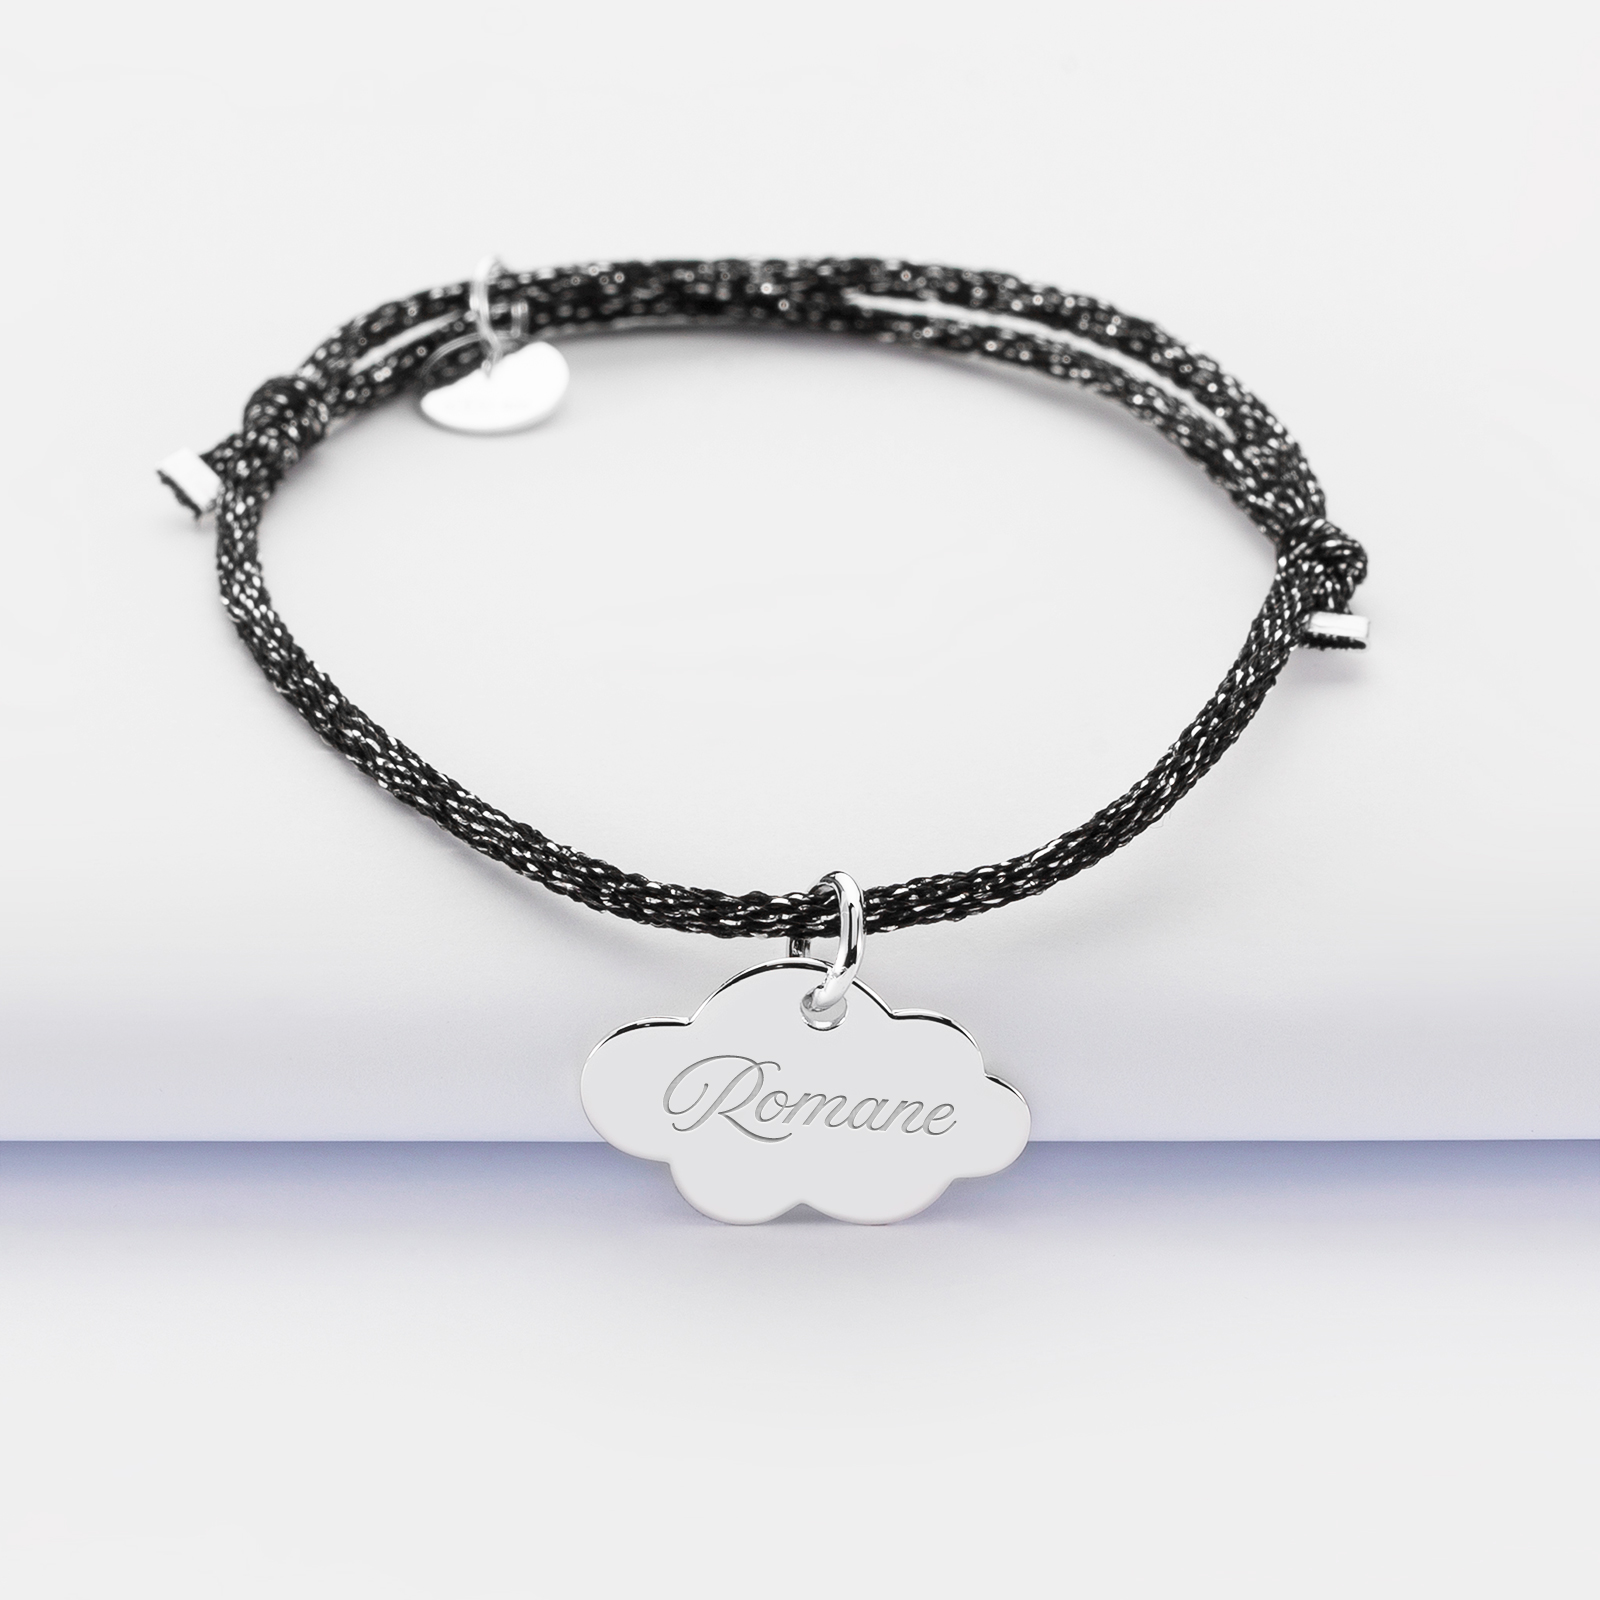 Sparkly cord bracelet with personalised engraved silver cloud medallion 20x14 mm - name